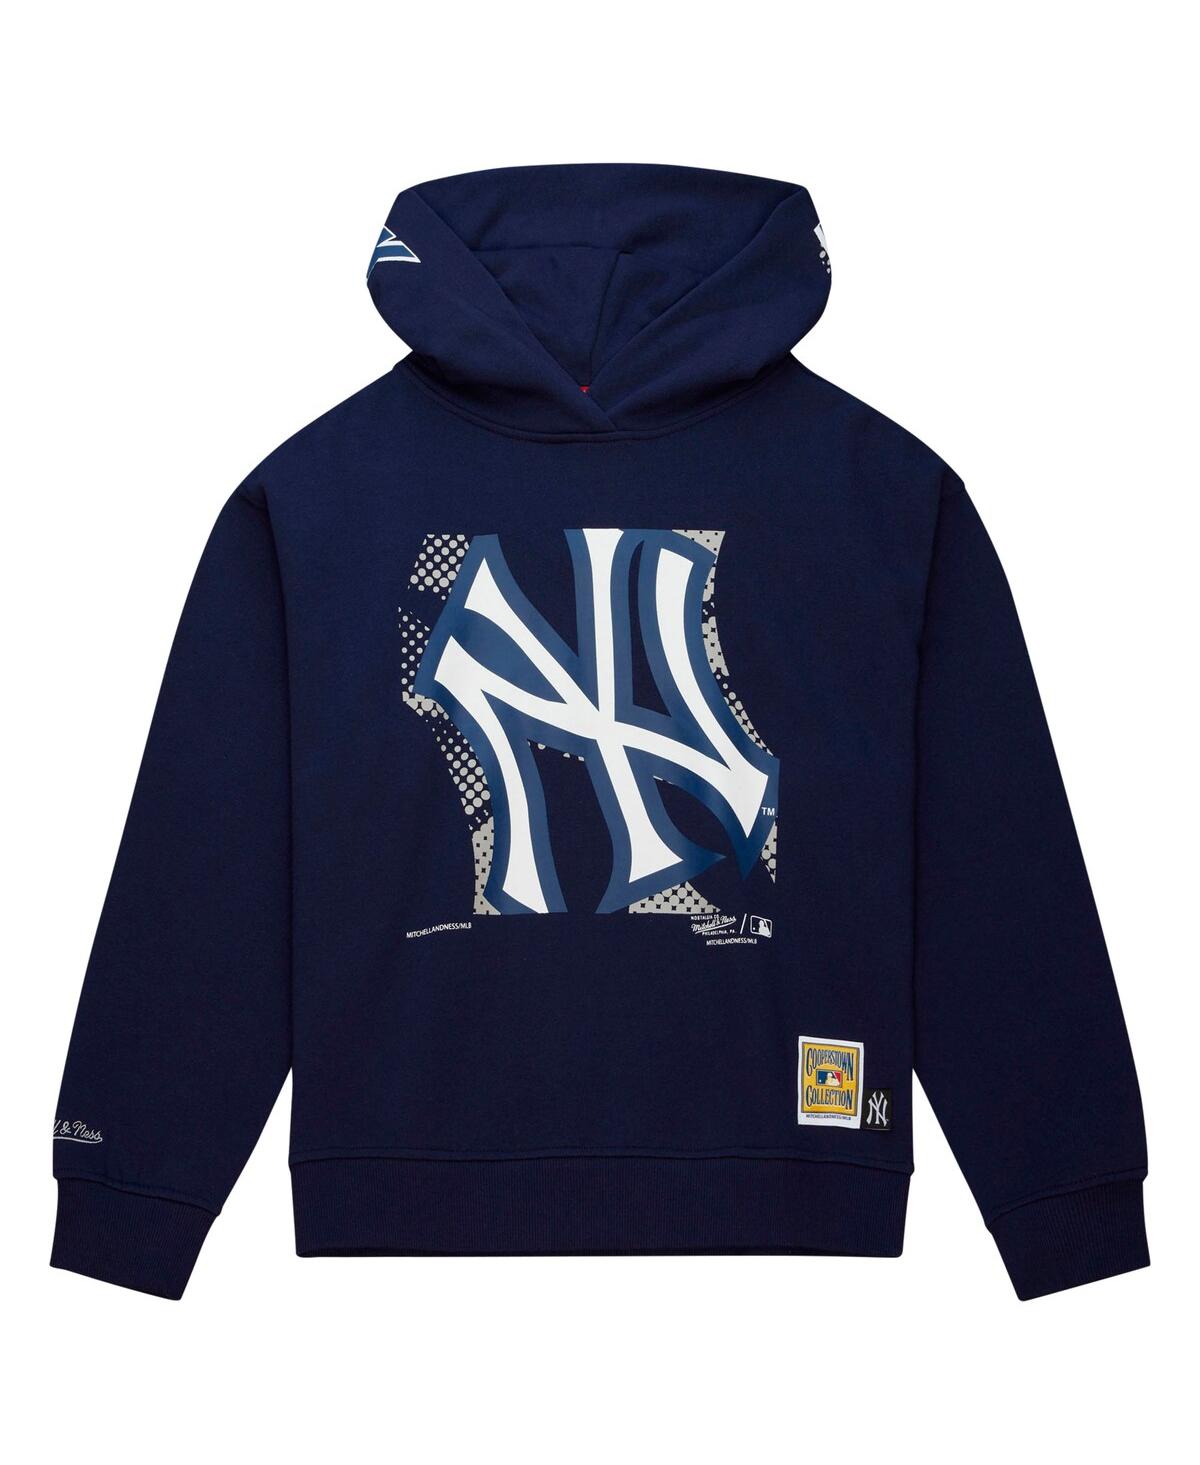 Shop Mitchell & Ness Women's Mitchell And Ness Navy New York Yankees Cooperstown Collection Big Face 7.0 Pullover Hoodie